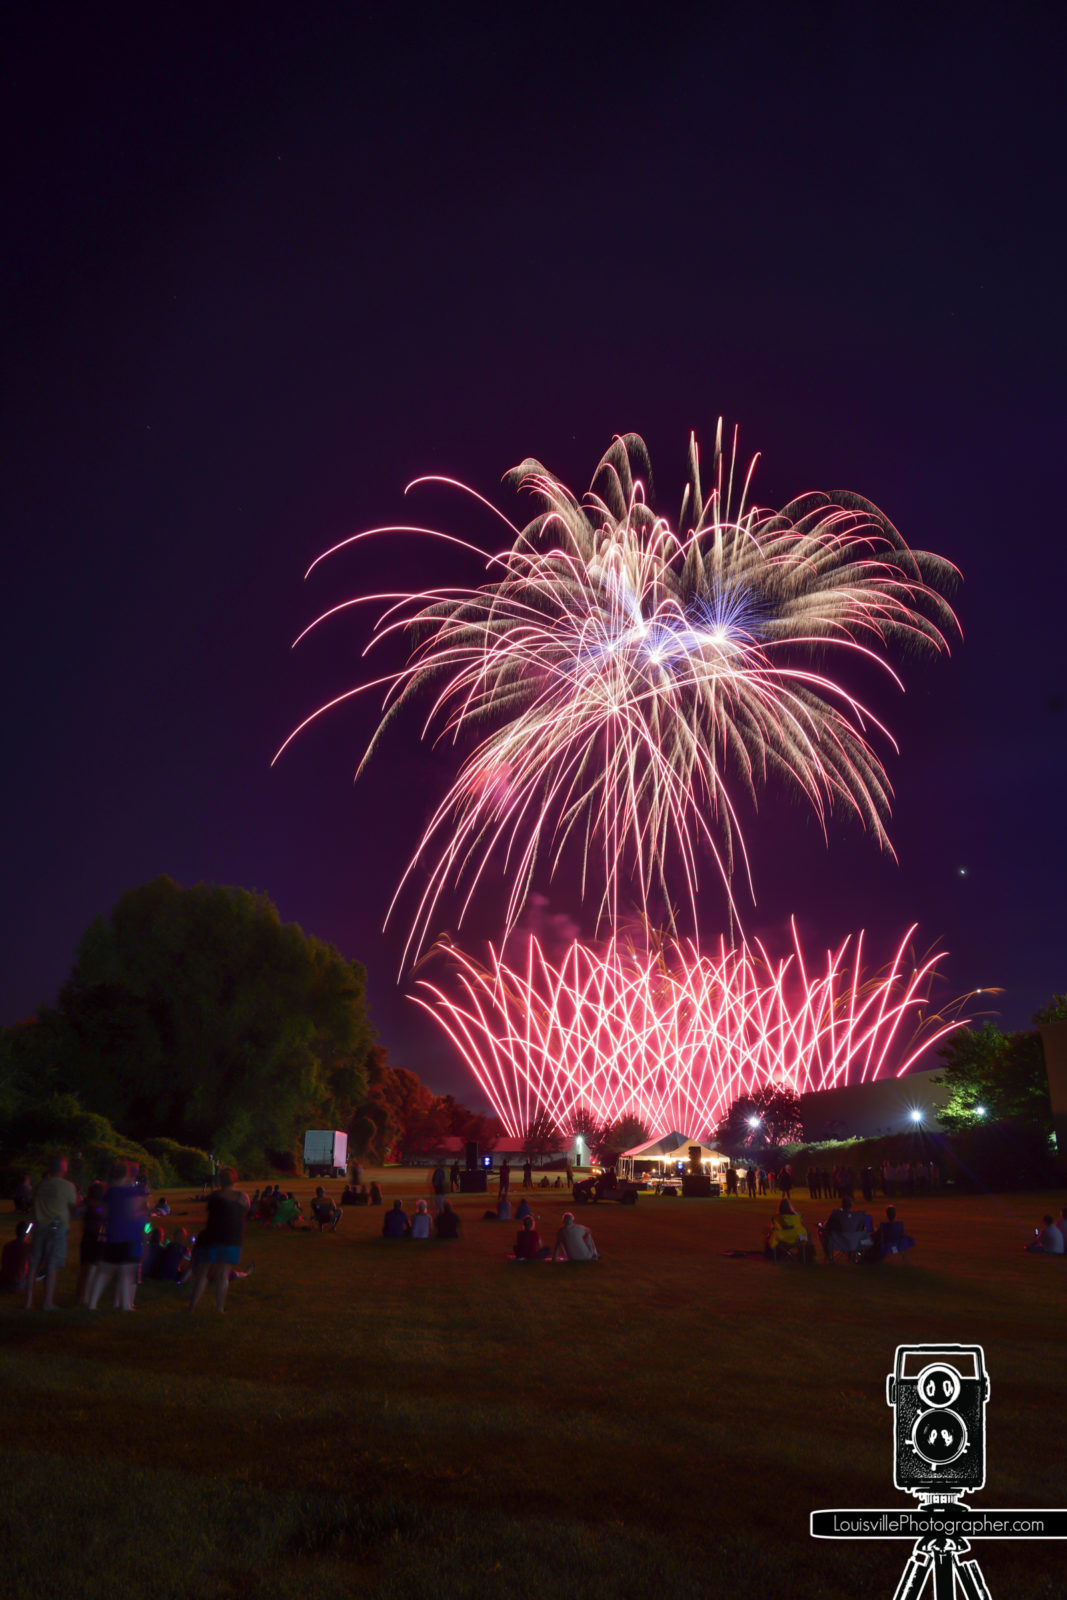 Louisville Event Photographer - 4th of July Dinner Event and Fireworks at Belterra Casino